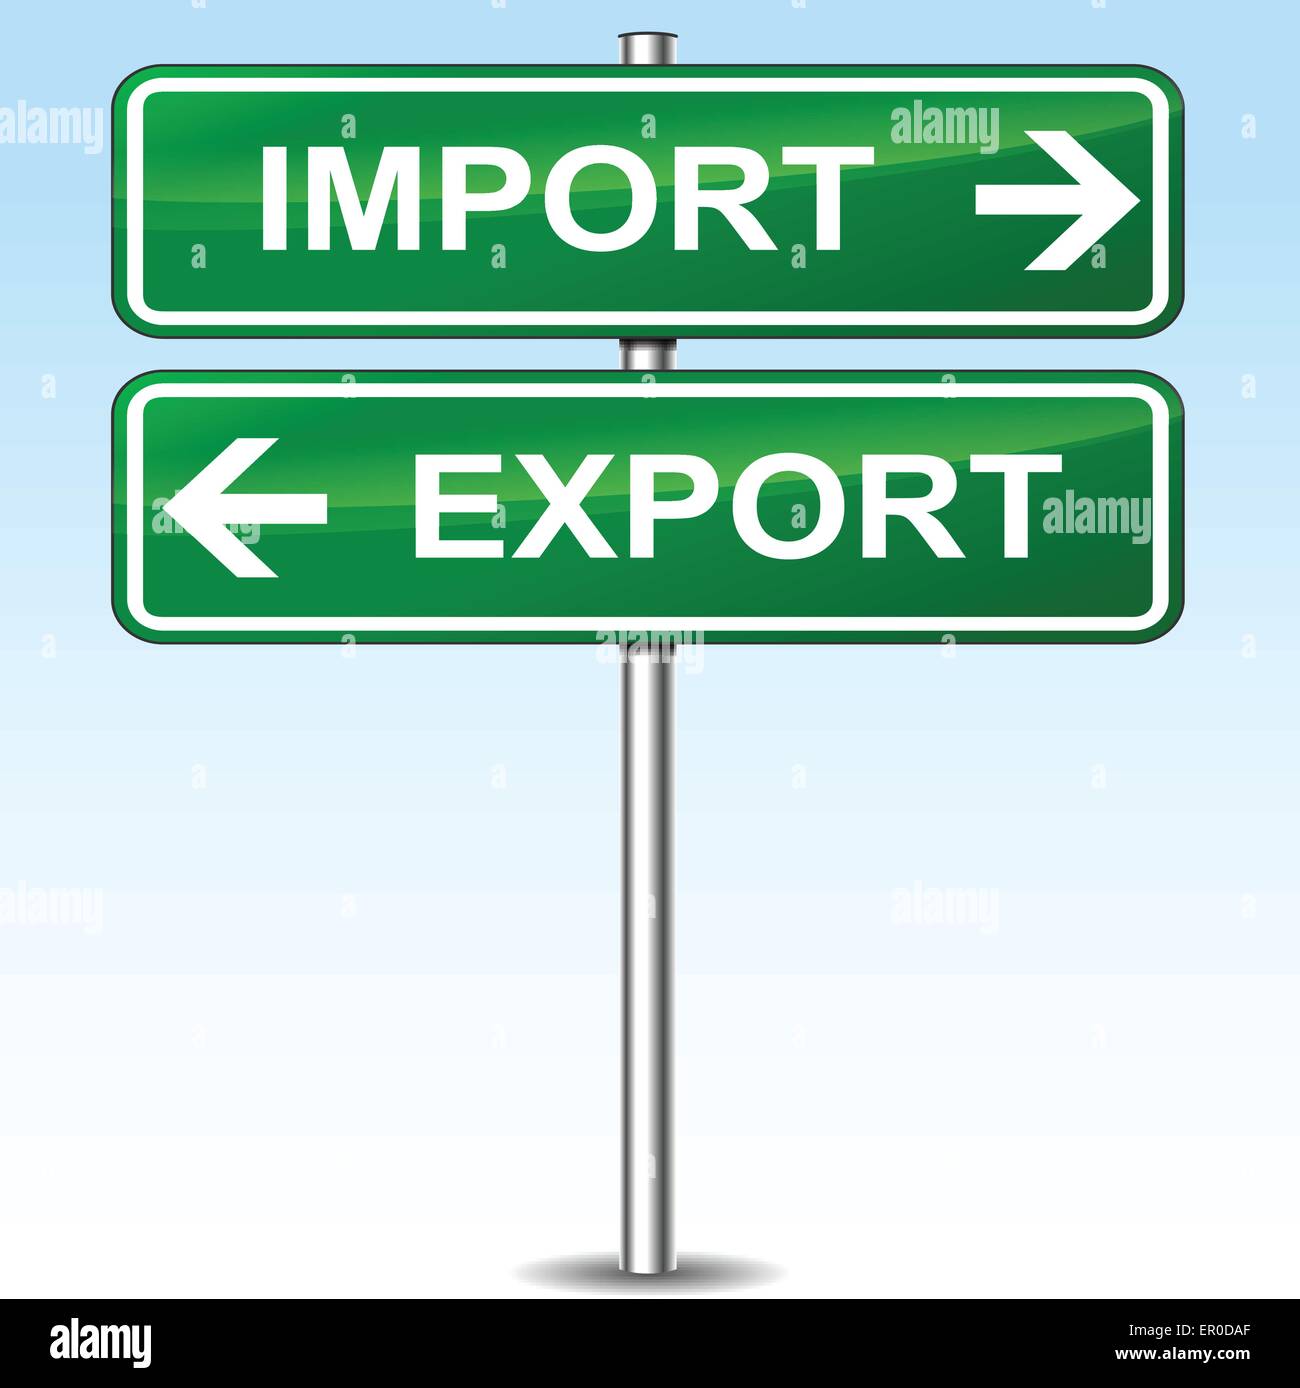 Illustration of import and export green sign Stock Vector